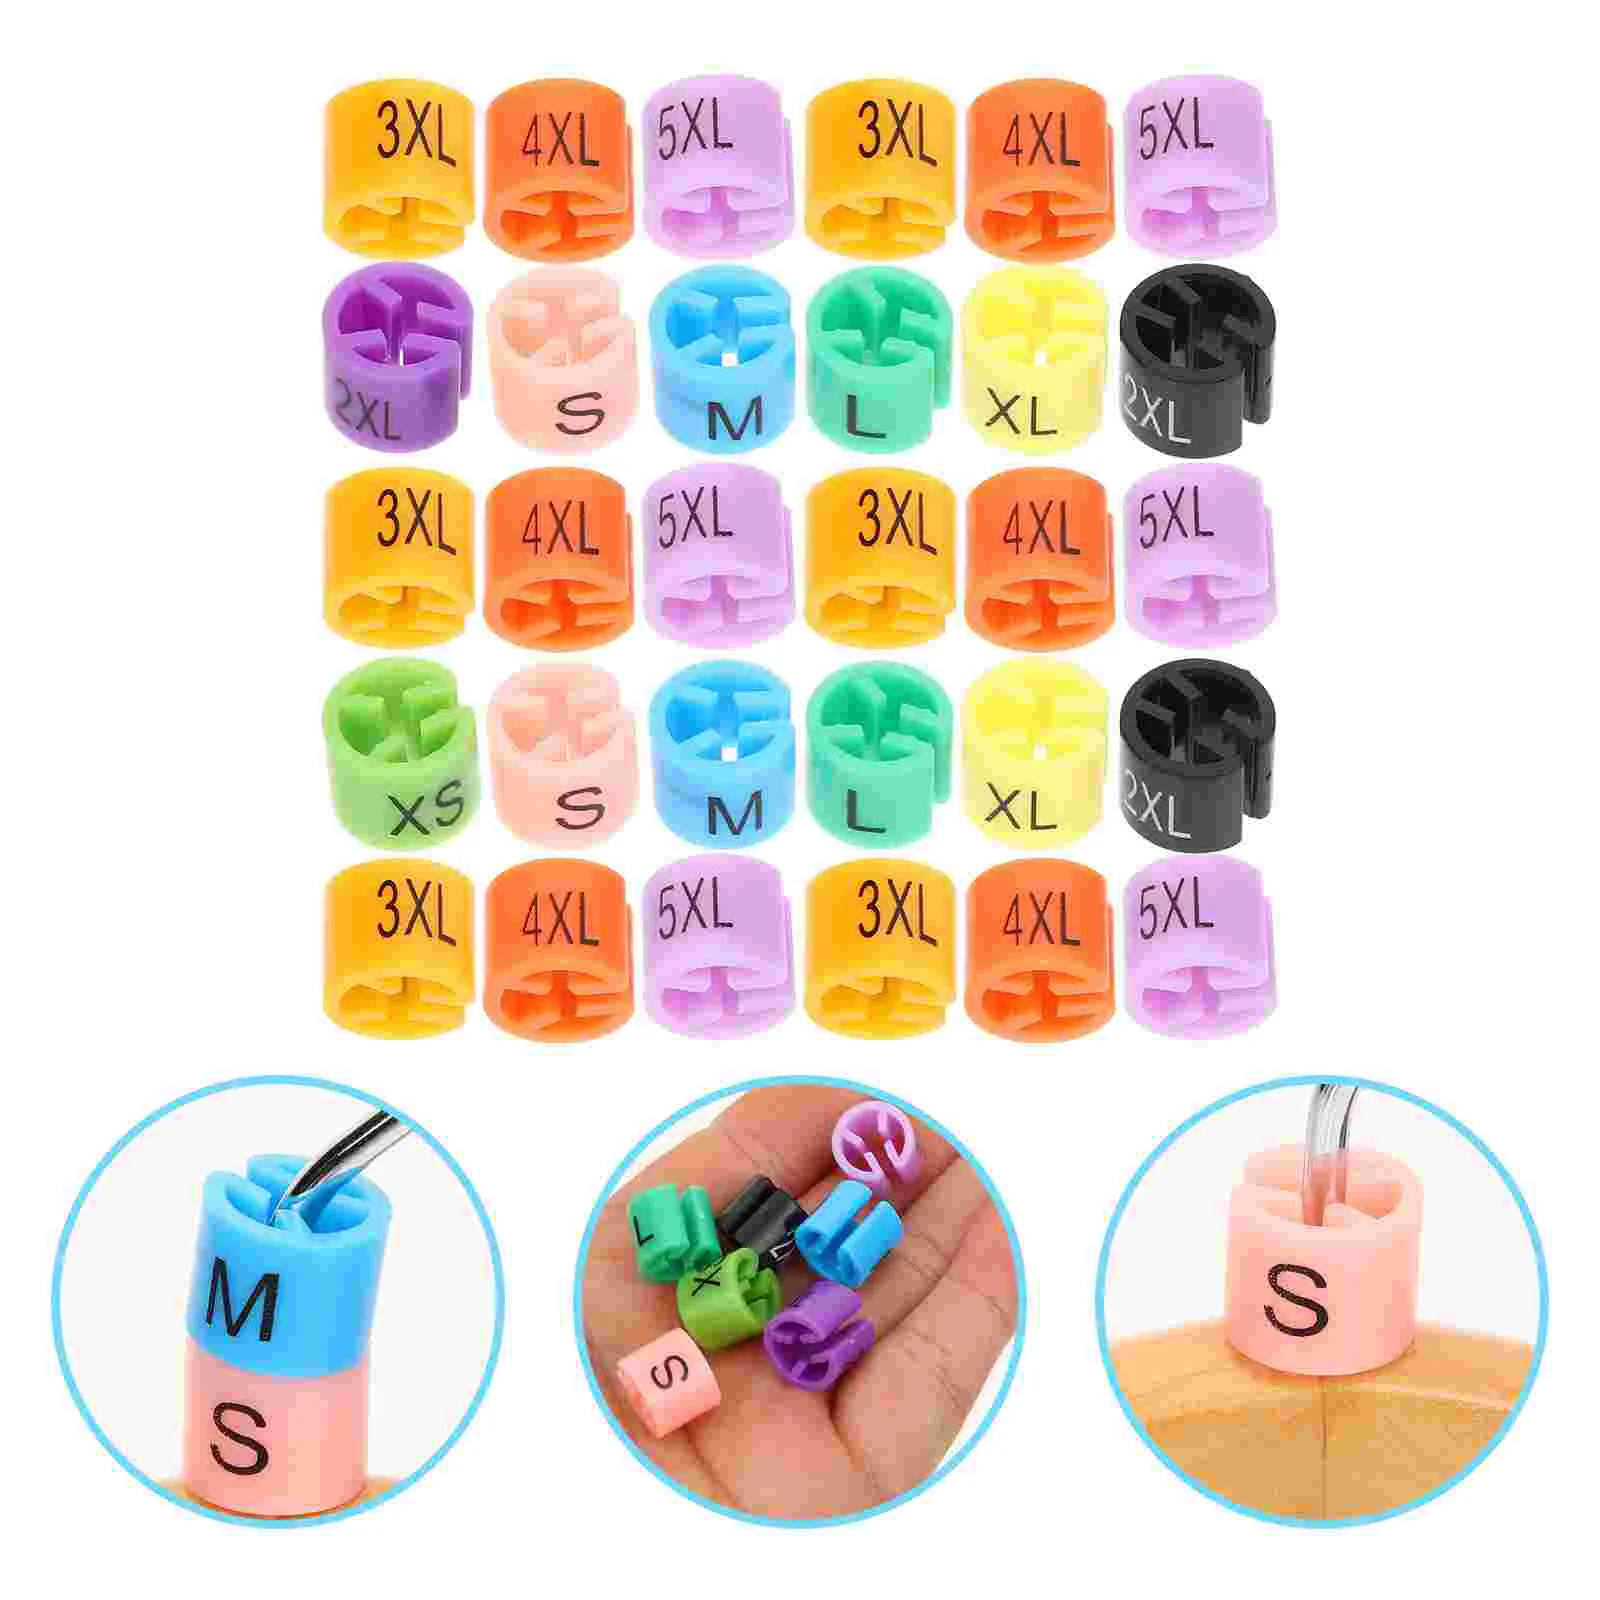 

Hanger Size Markers Tags Clothes Marker Garment Tag Sizes Number Hangers Coding Clothing Assortment Sizer Shop Plastic